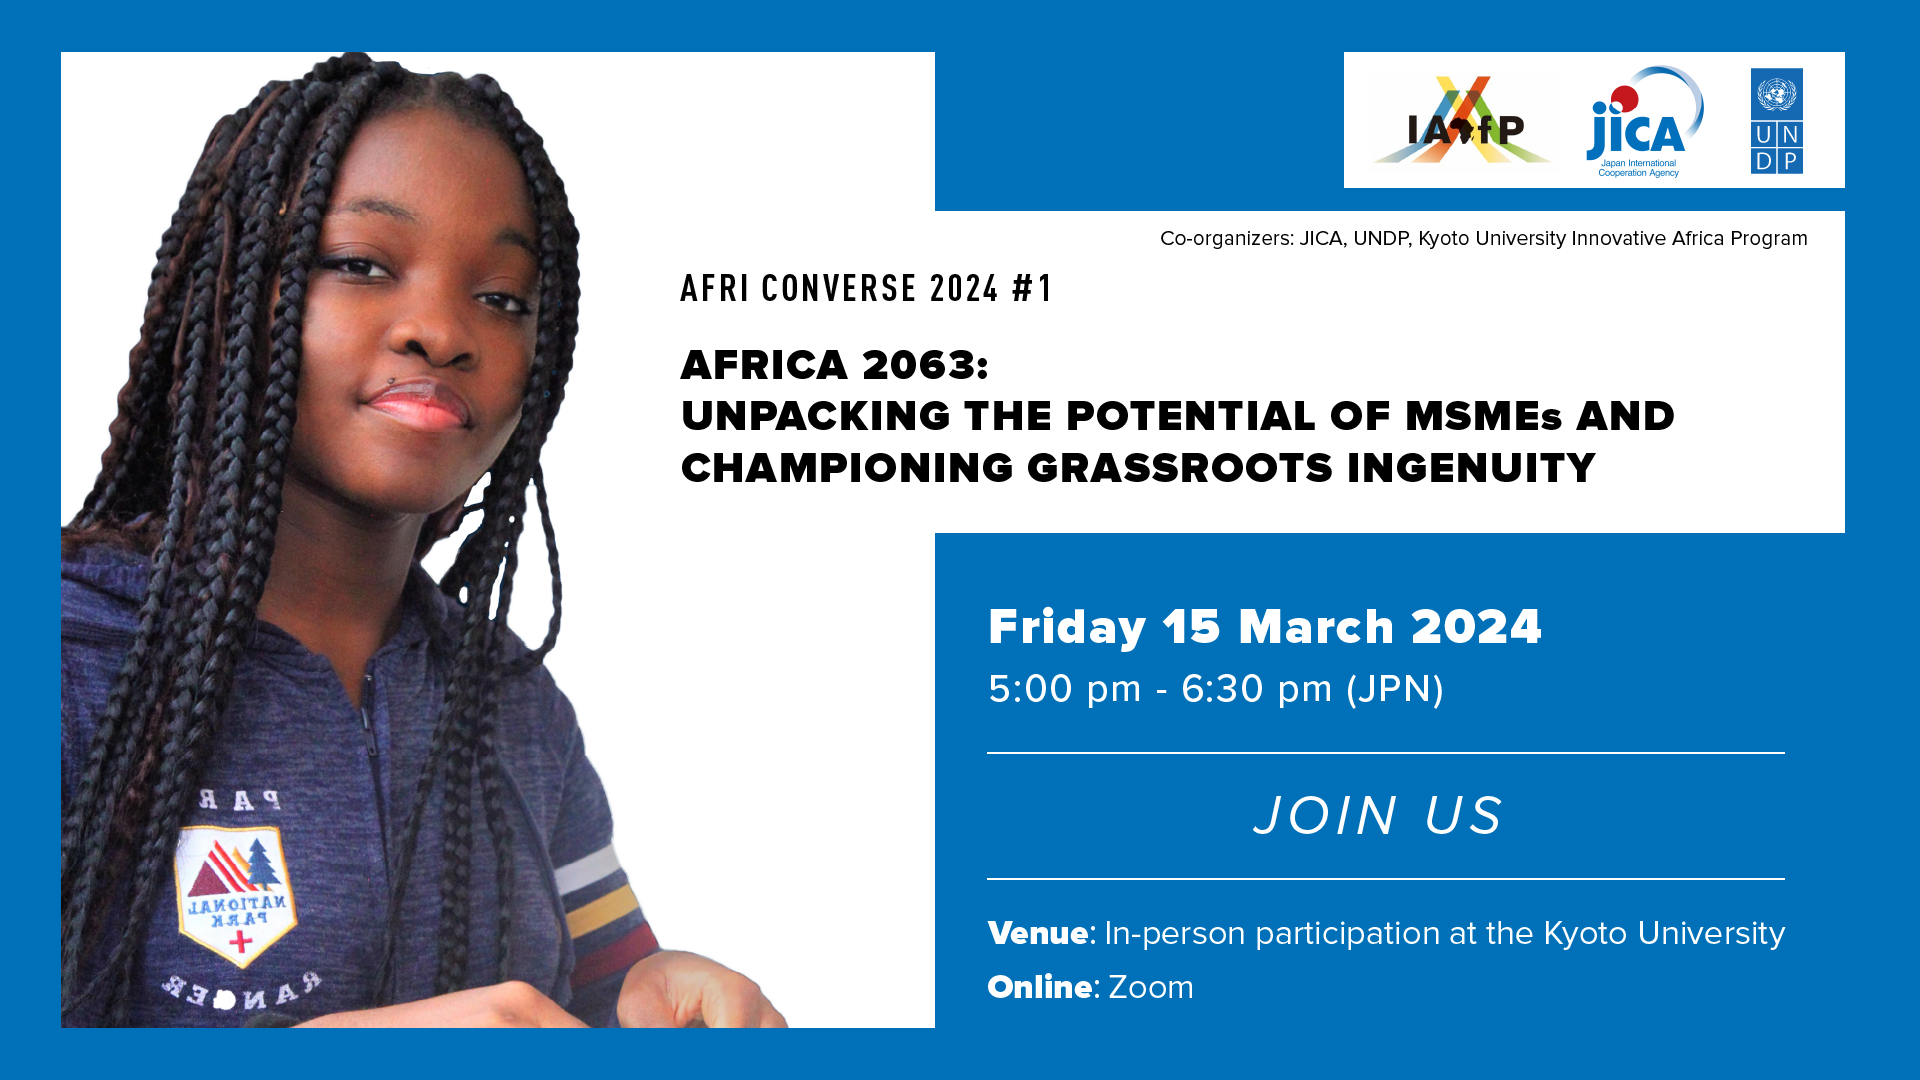 AFRI CONVERSE 2024 #1 Africa 2063: Unpacking the Potential of MSMEs  and Championing Grassroots Ingenuity